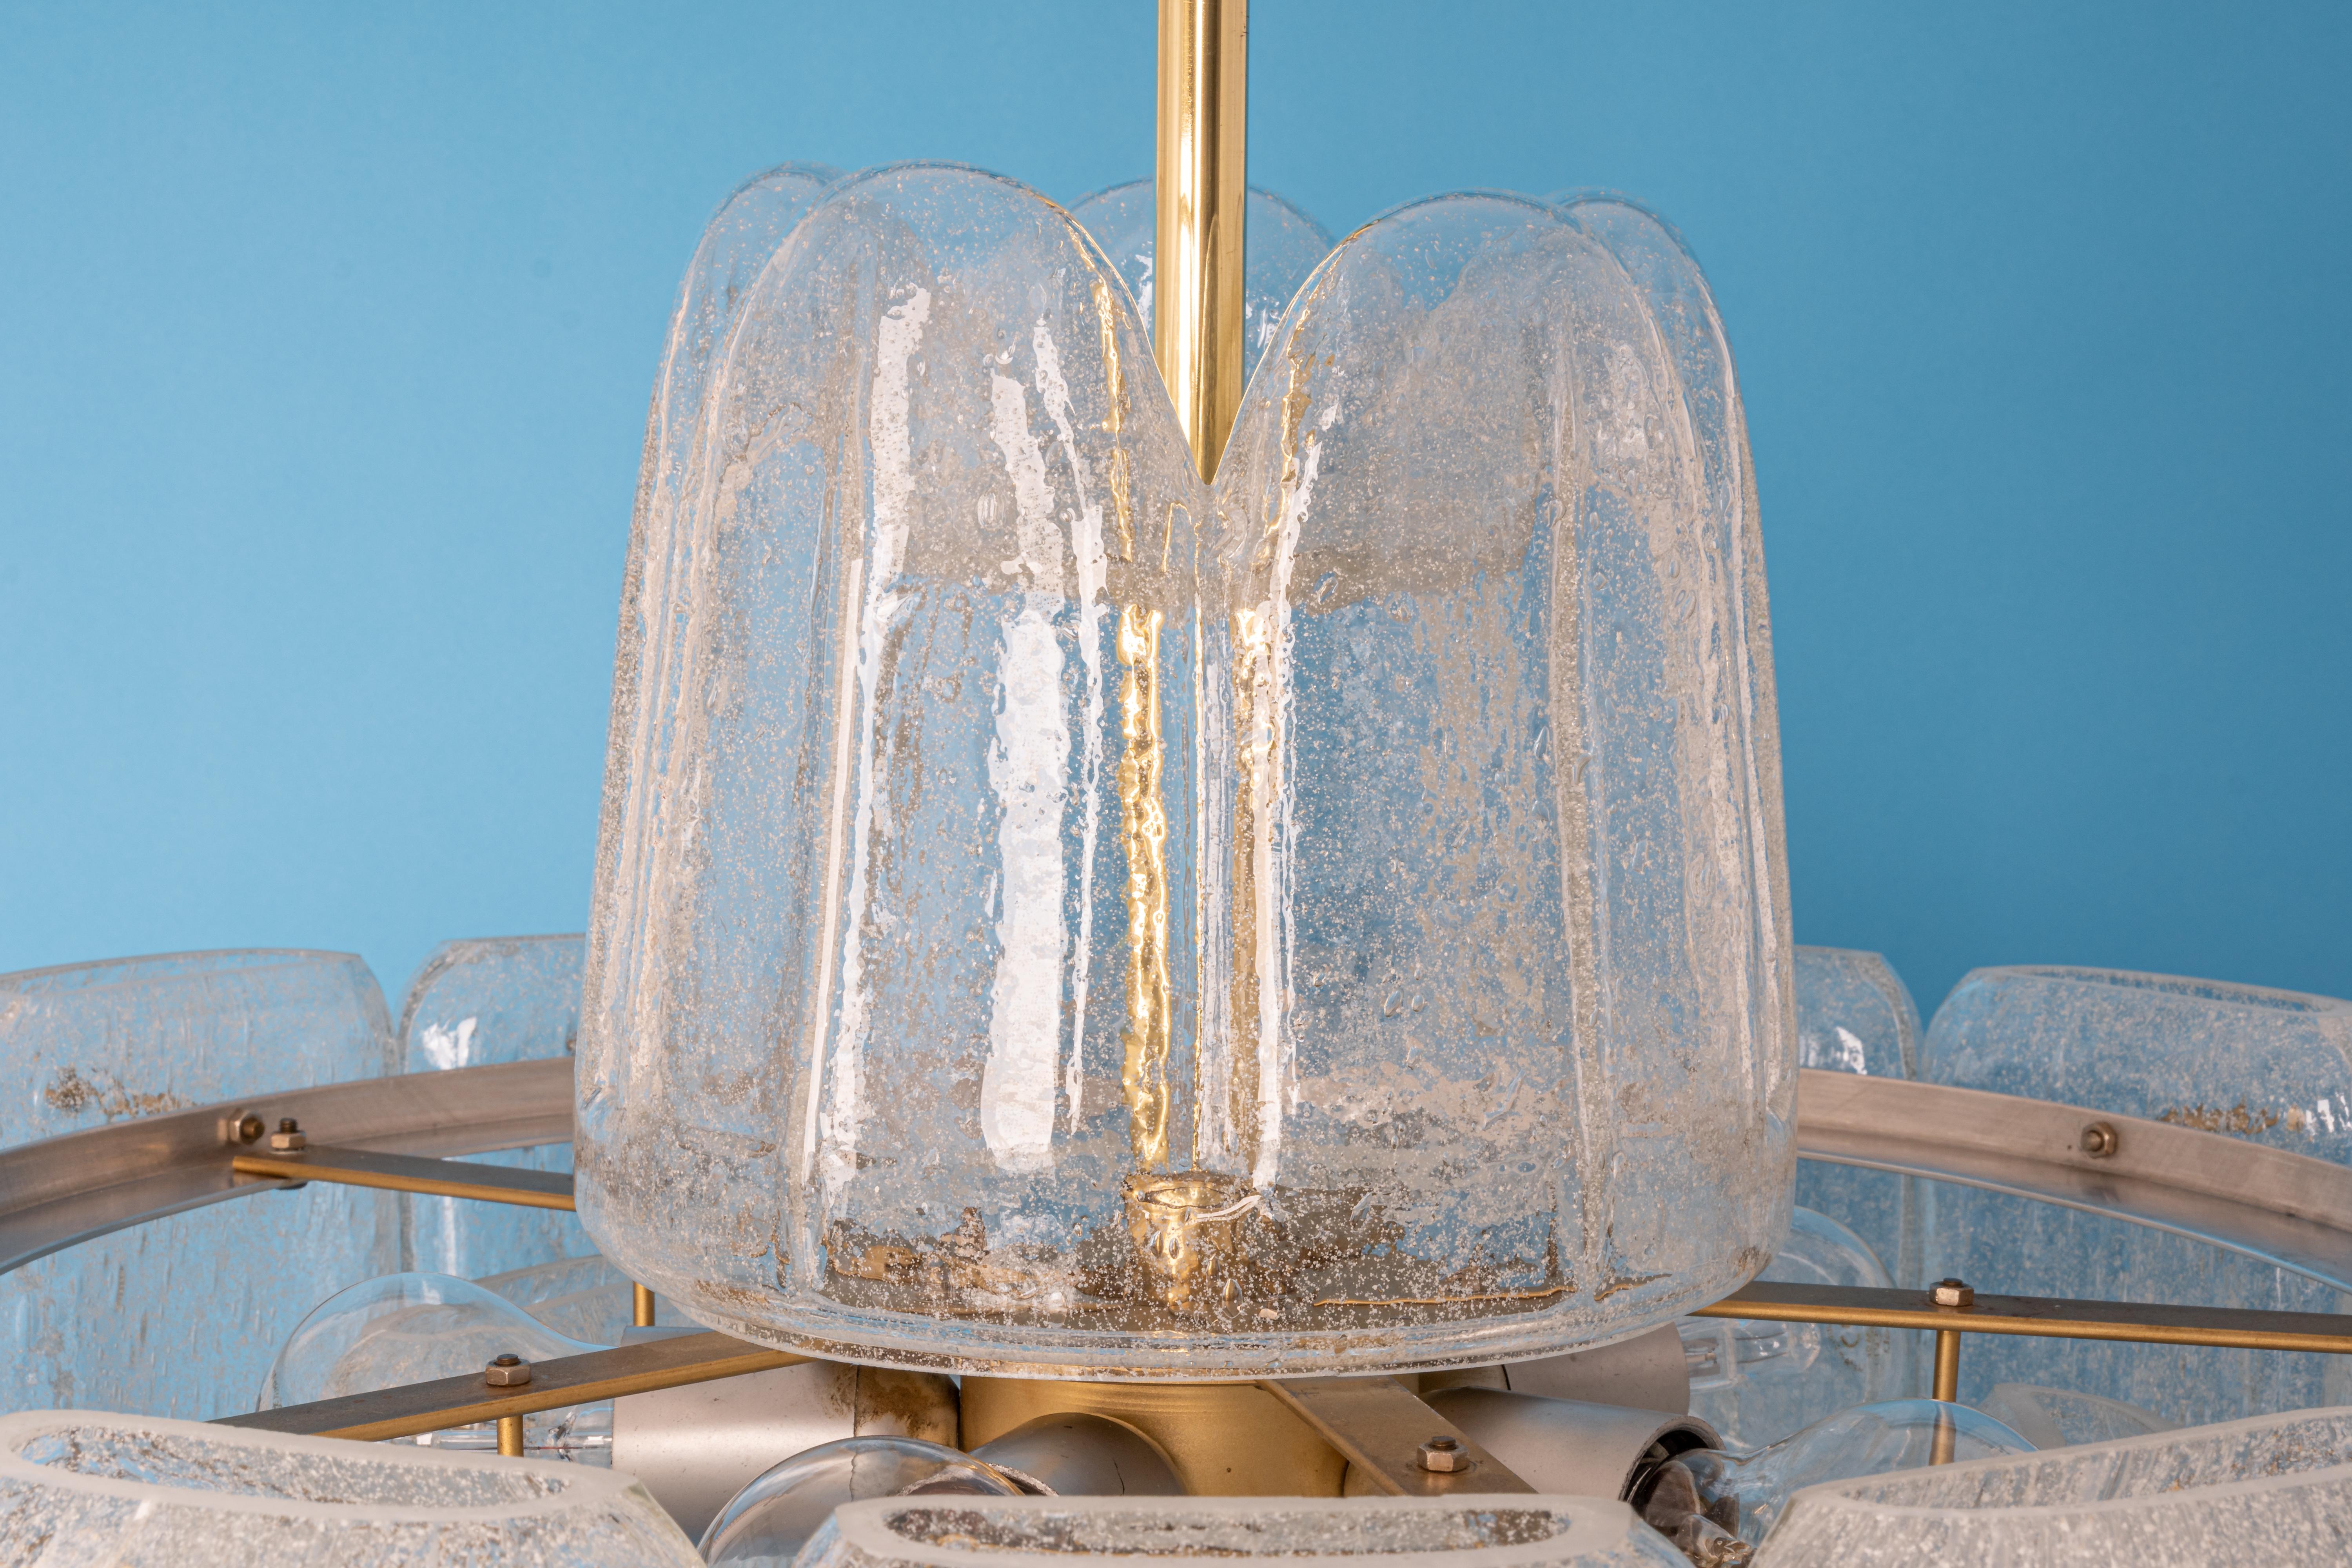 Fantastic big midcentury chandelier by Doria, Germany, manufactured circa 1960-1969. 10 Murano glass suspended from the fixture.

High quality and in perfect condition. Cleaned, well-wired and ready to use. 

The fixture requires 5 Standard